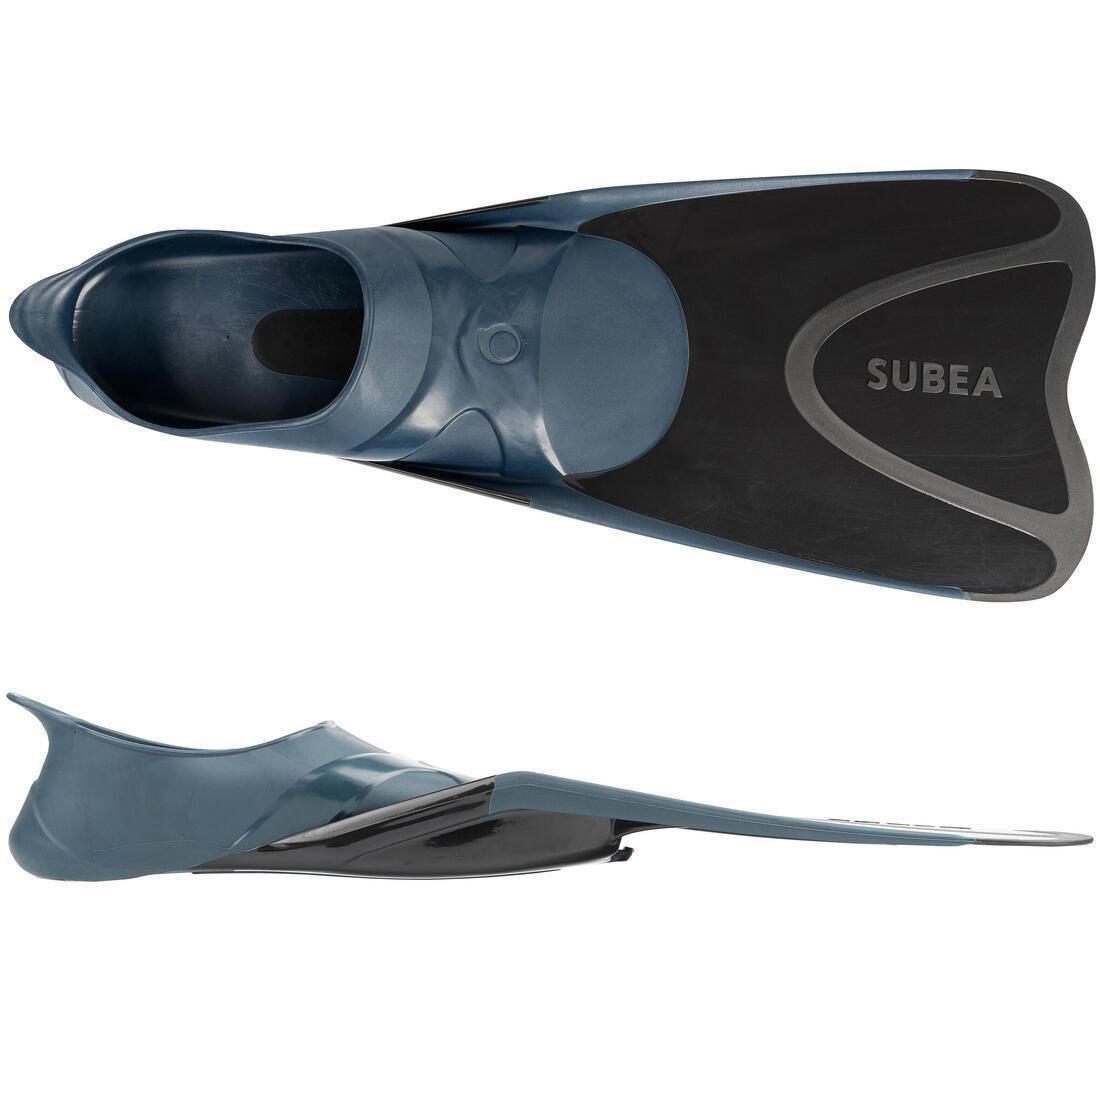 SUBEA - Unisex Snorkelling Kit With Fins - Snk500, Black